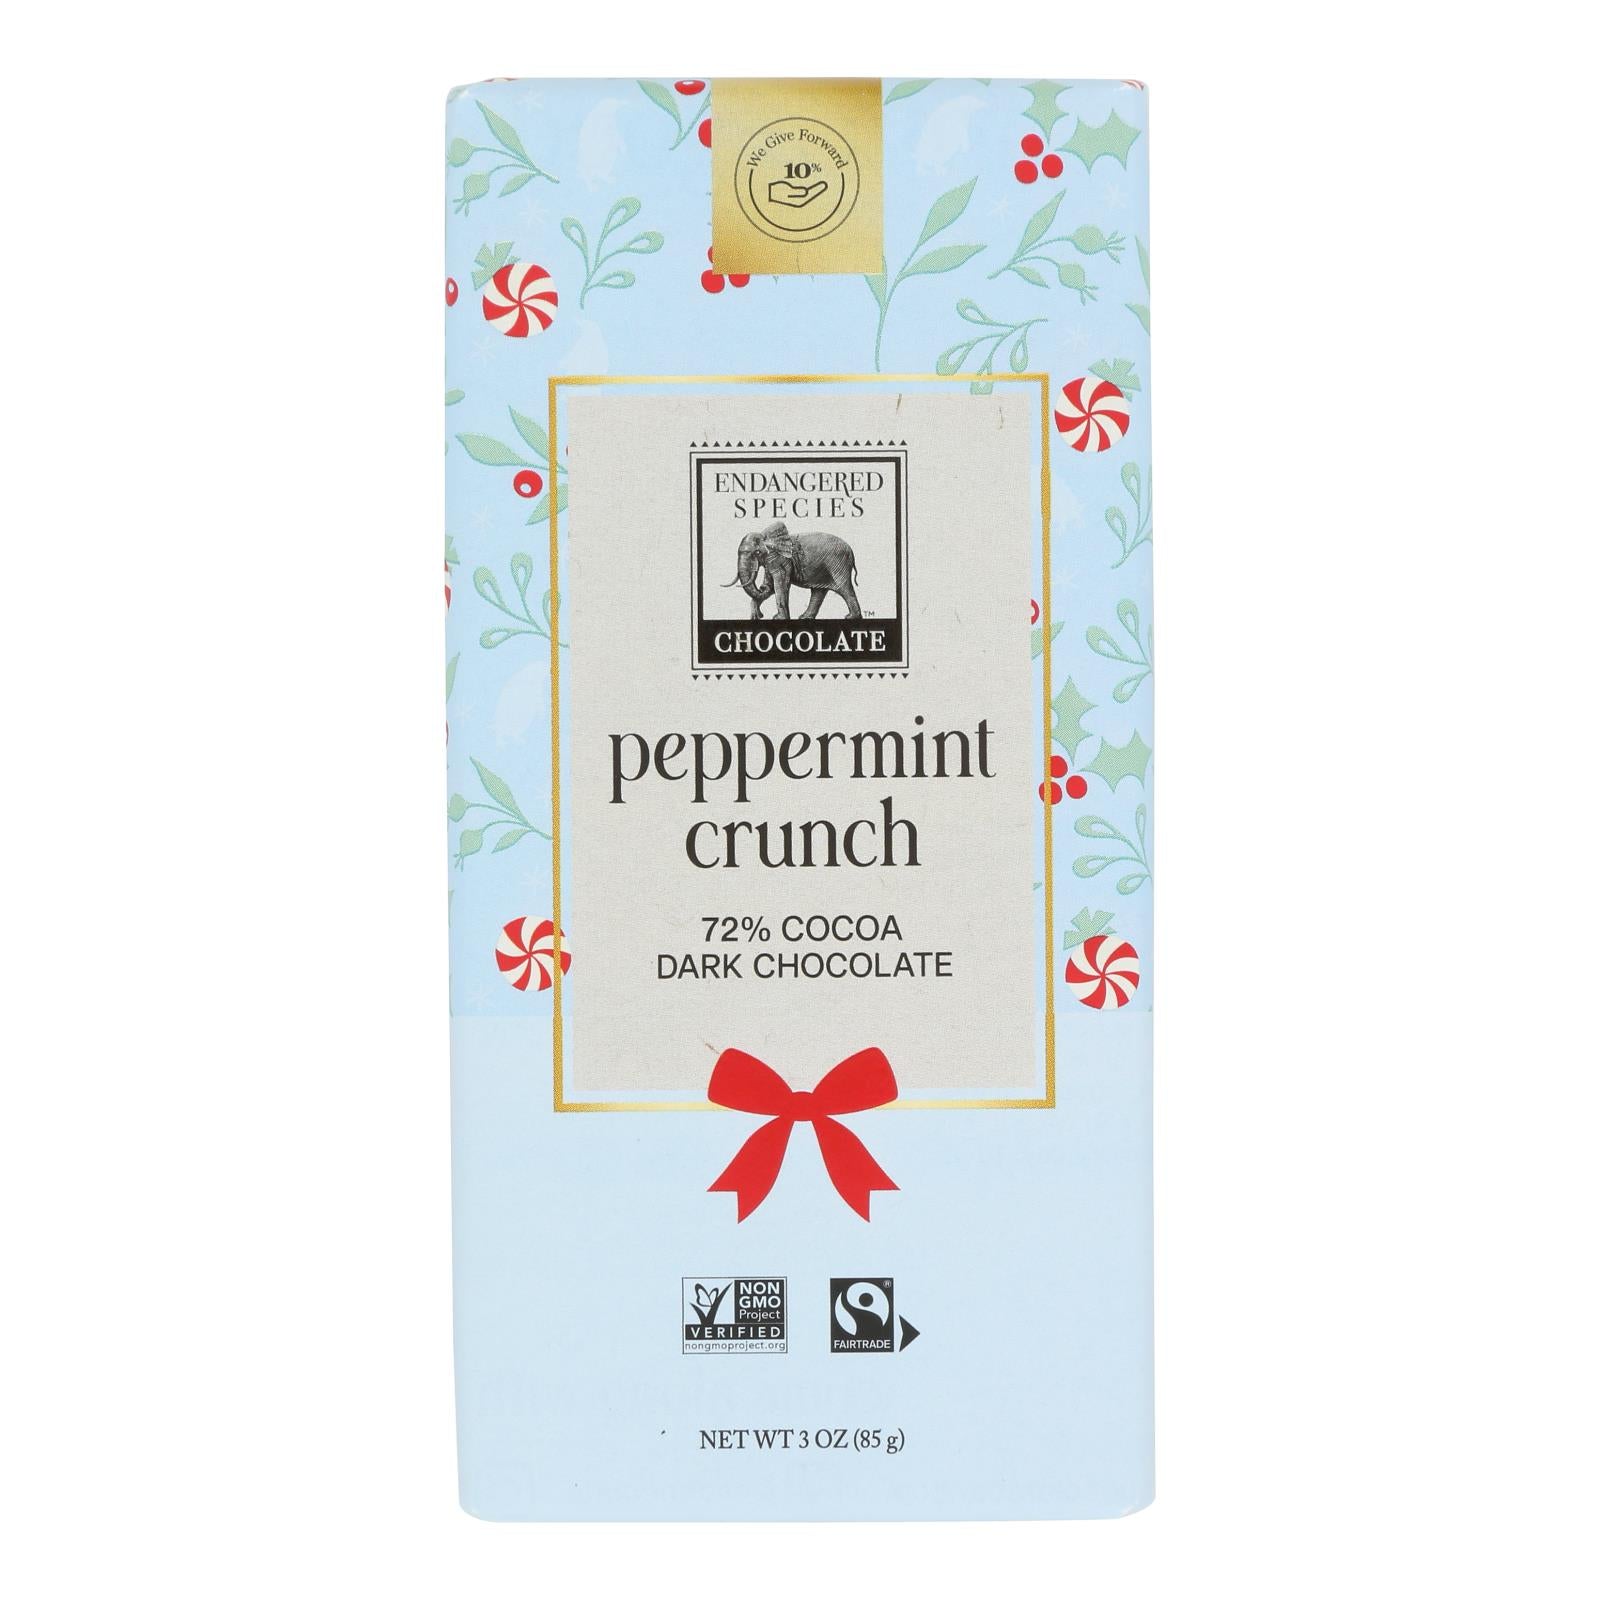 Our Endangered Species Chocolate Dark Chocolate Bar With Peppermint Crunch  - Case of 12 - 3 OZ